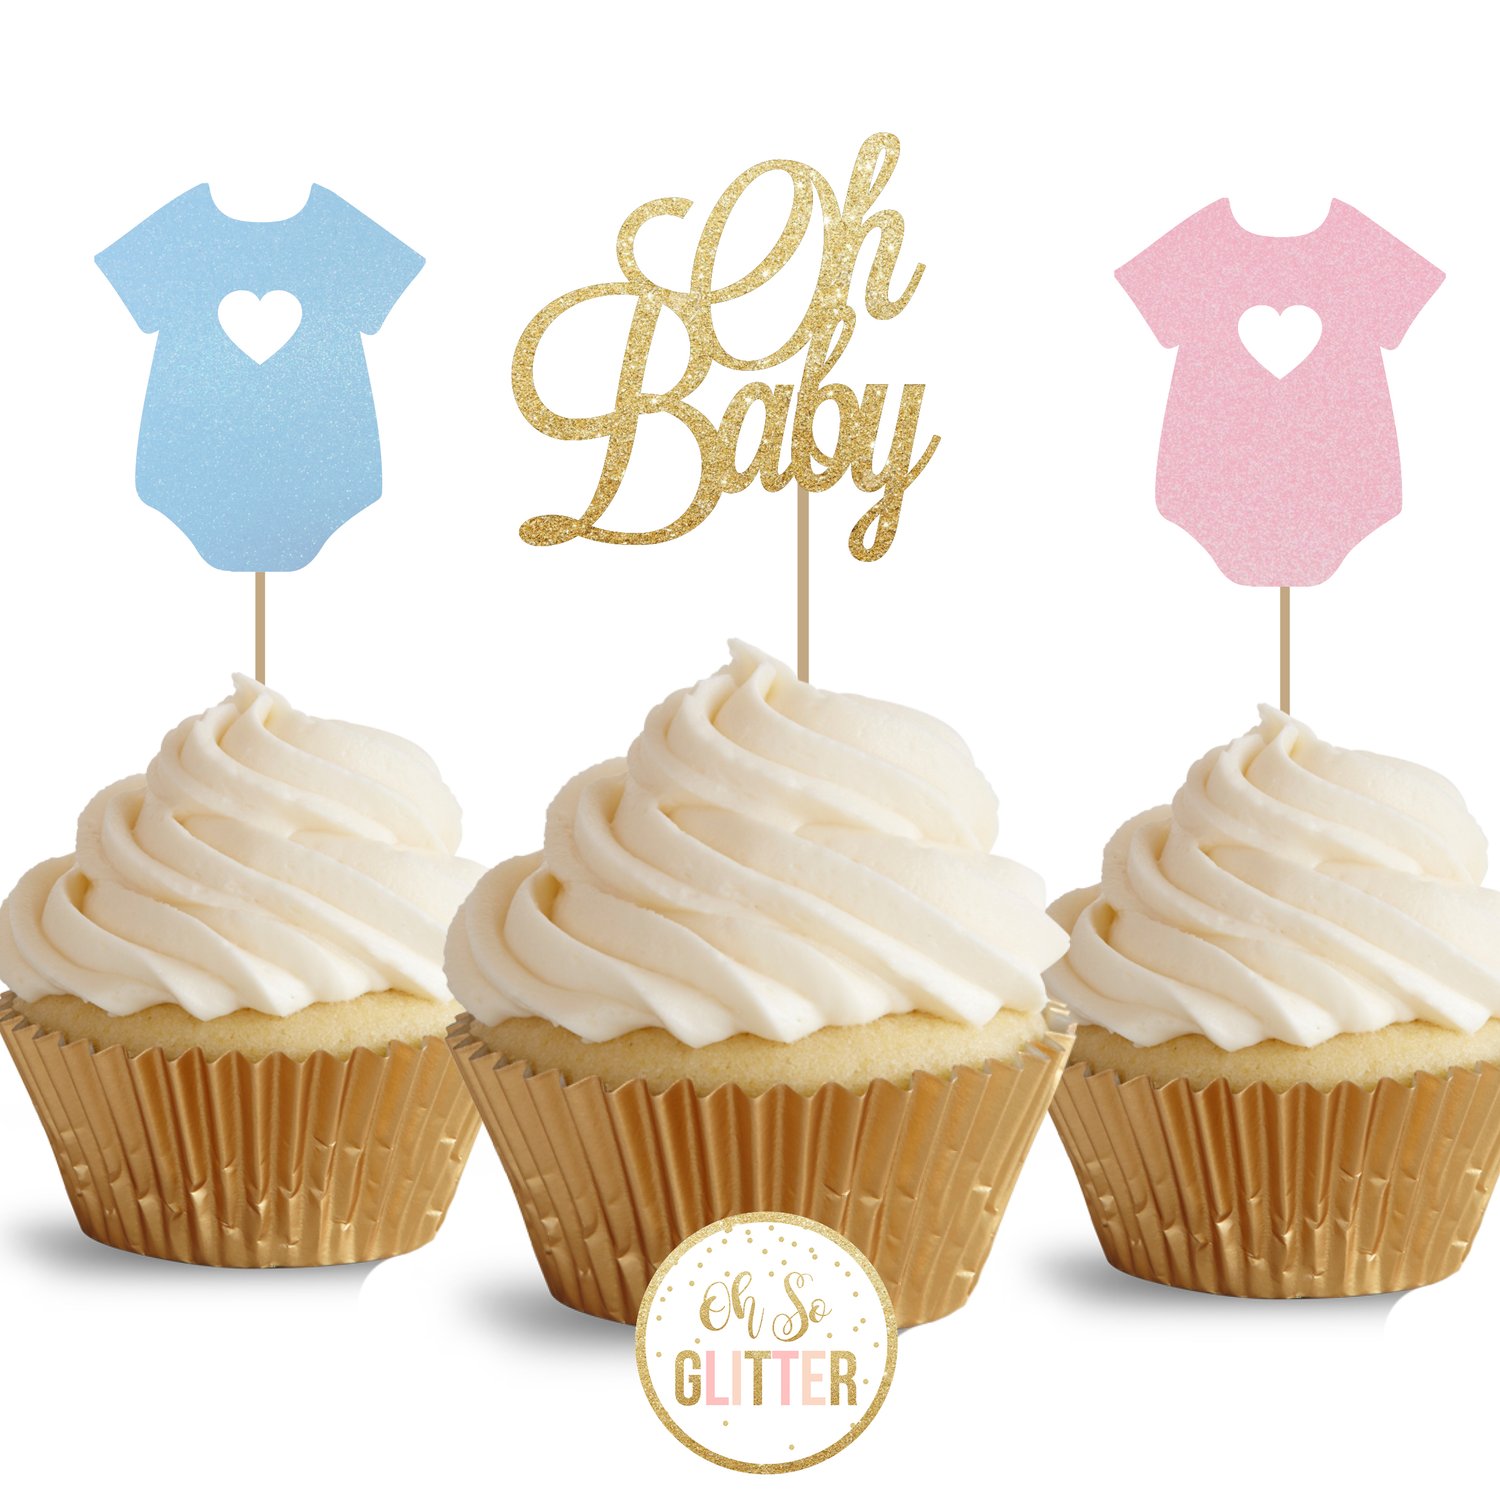 Image of Oh Baby - glitter cupcake toppers - pack of 12